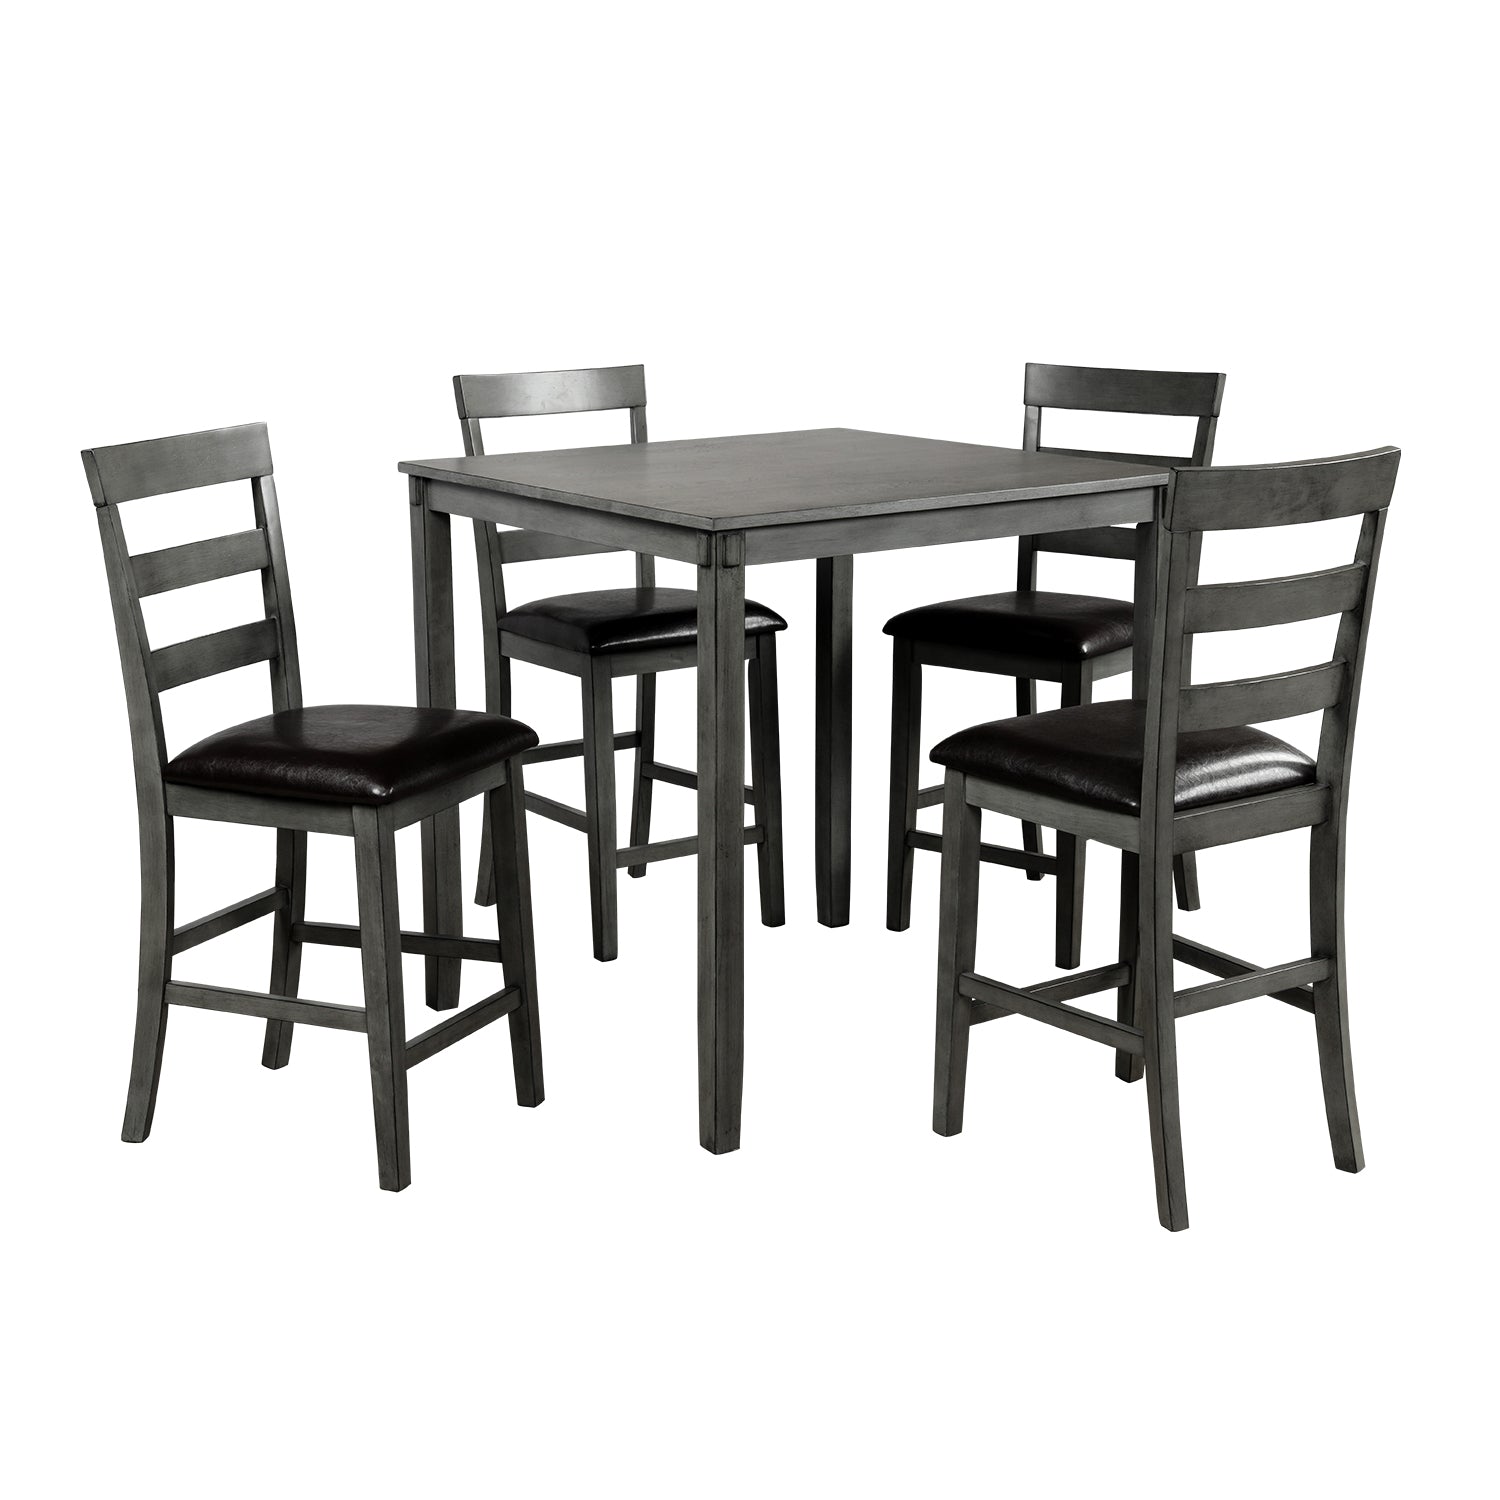 Square Counter Height Wooden Kitchen Dining Set, Dining Room Set with Table and 4 Chairs-Boyel Living